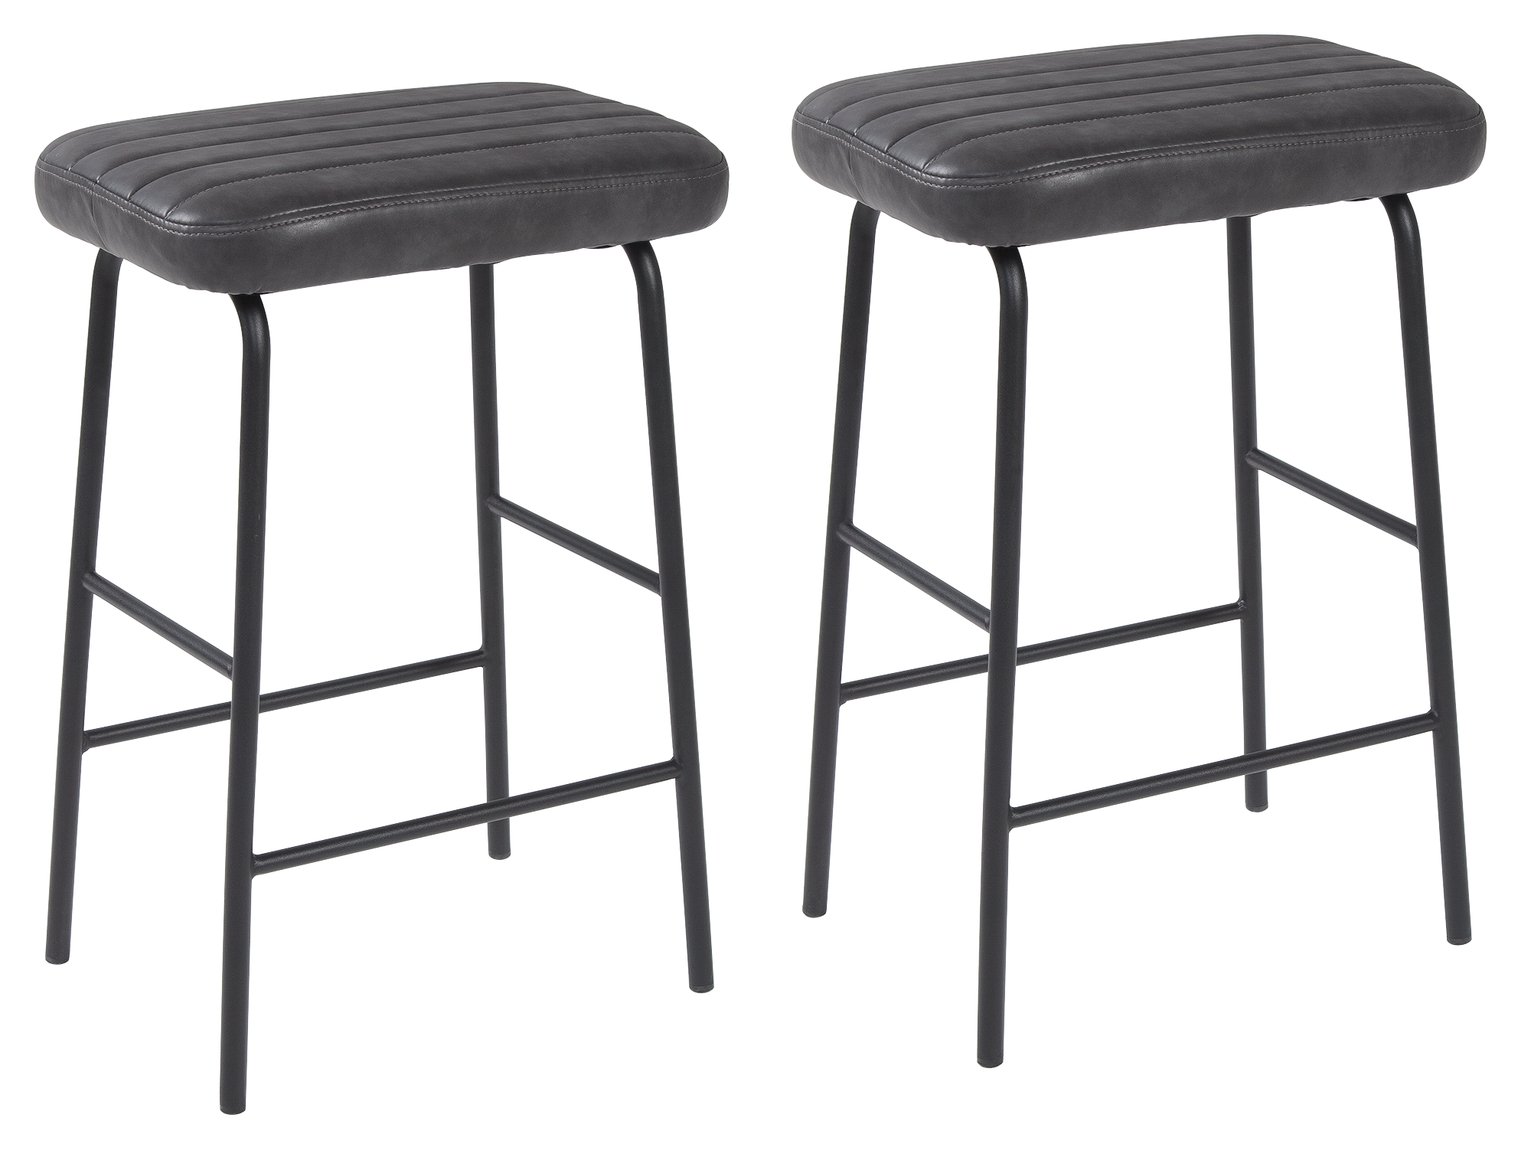 Argos Home Logan Pair of Faux Leather Bar Stools Review